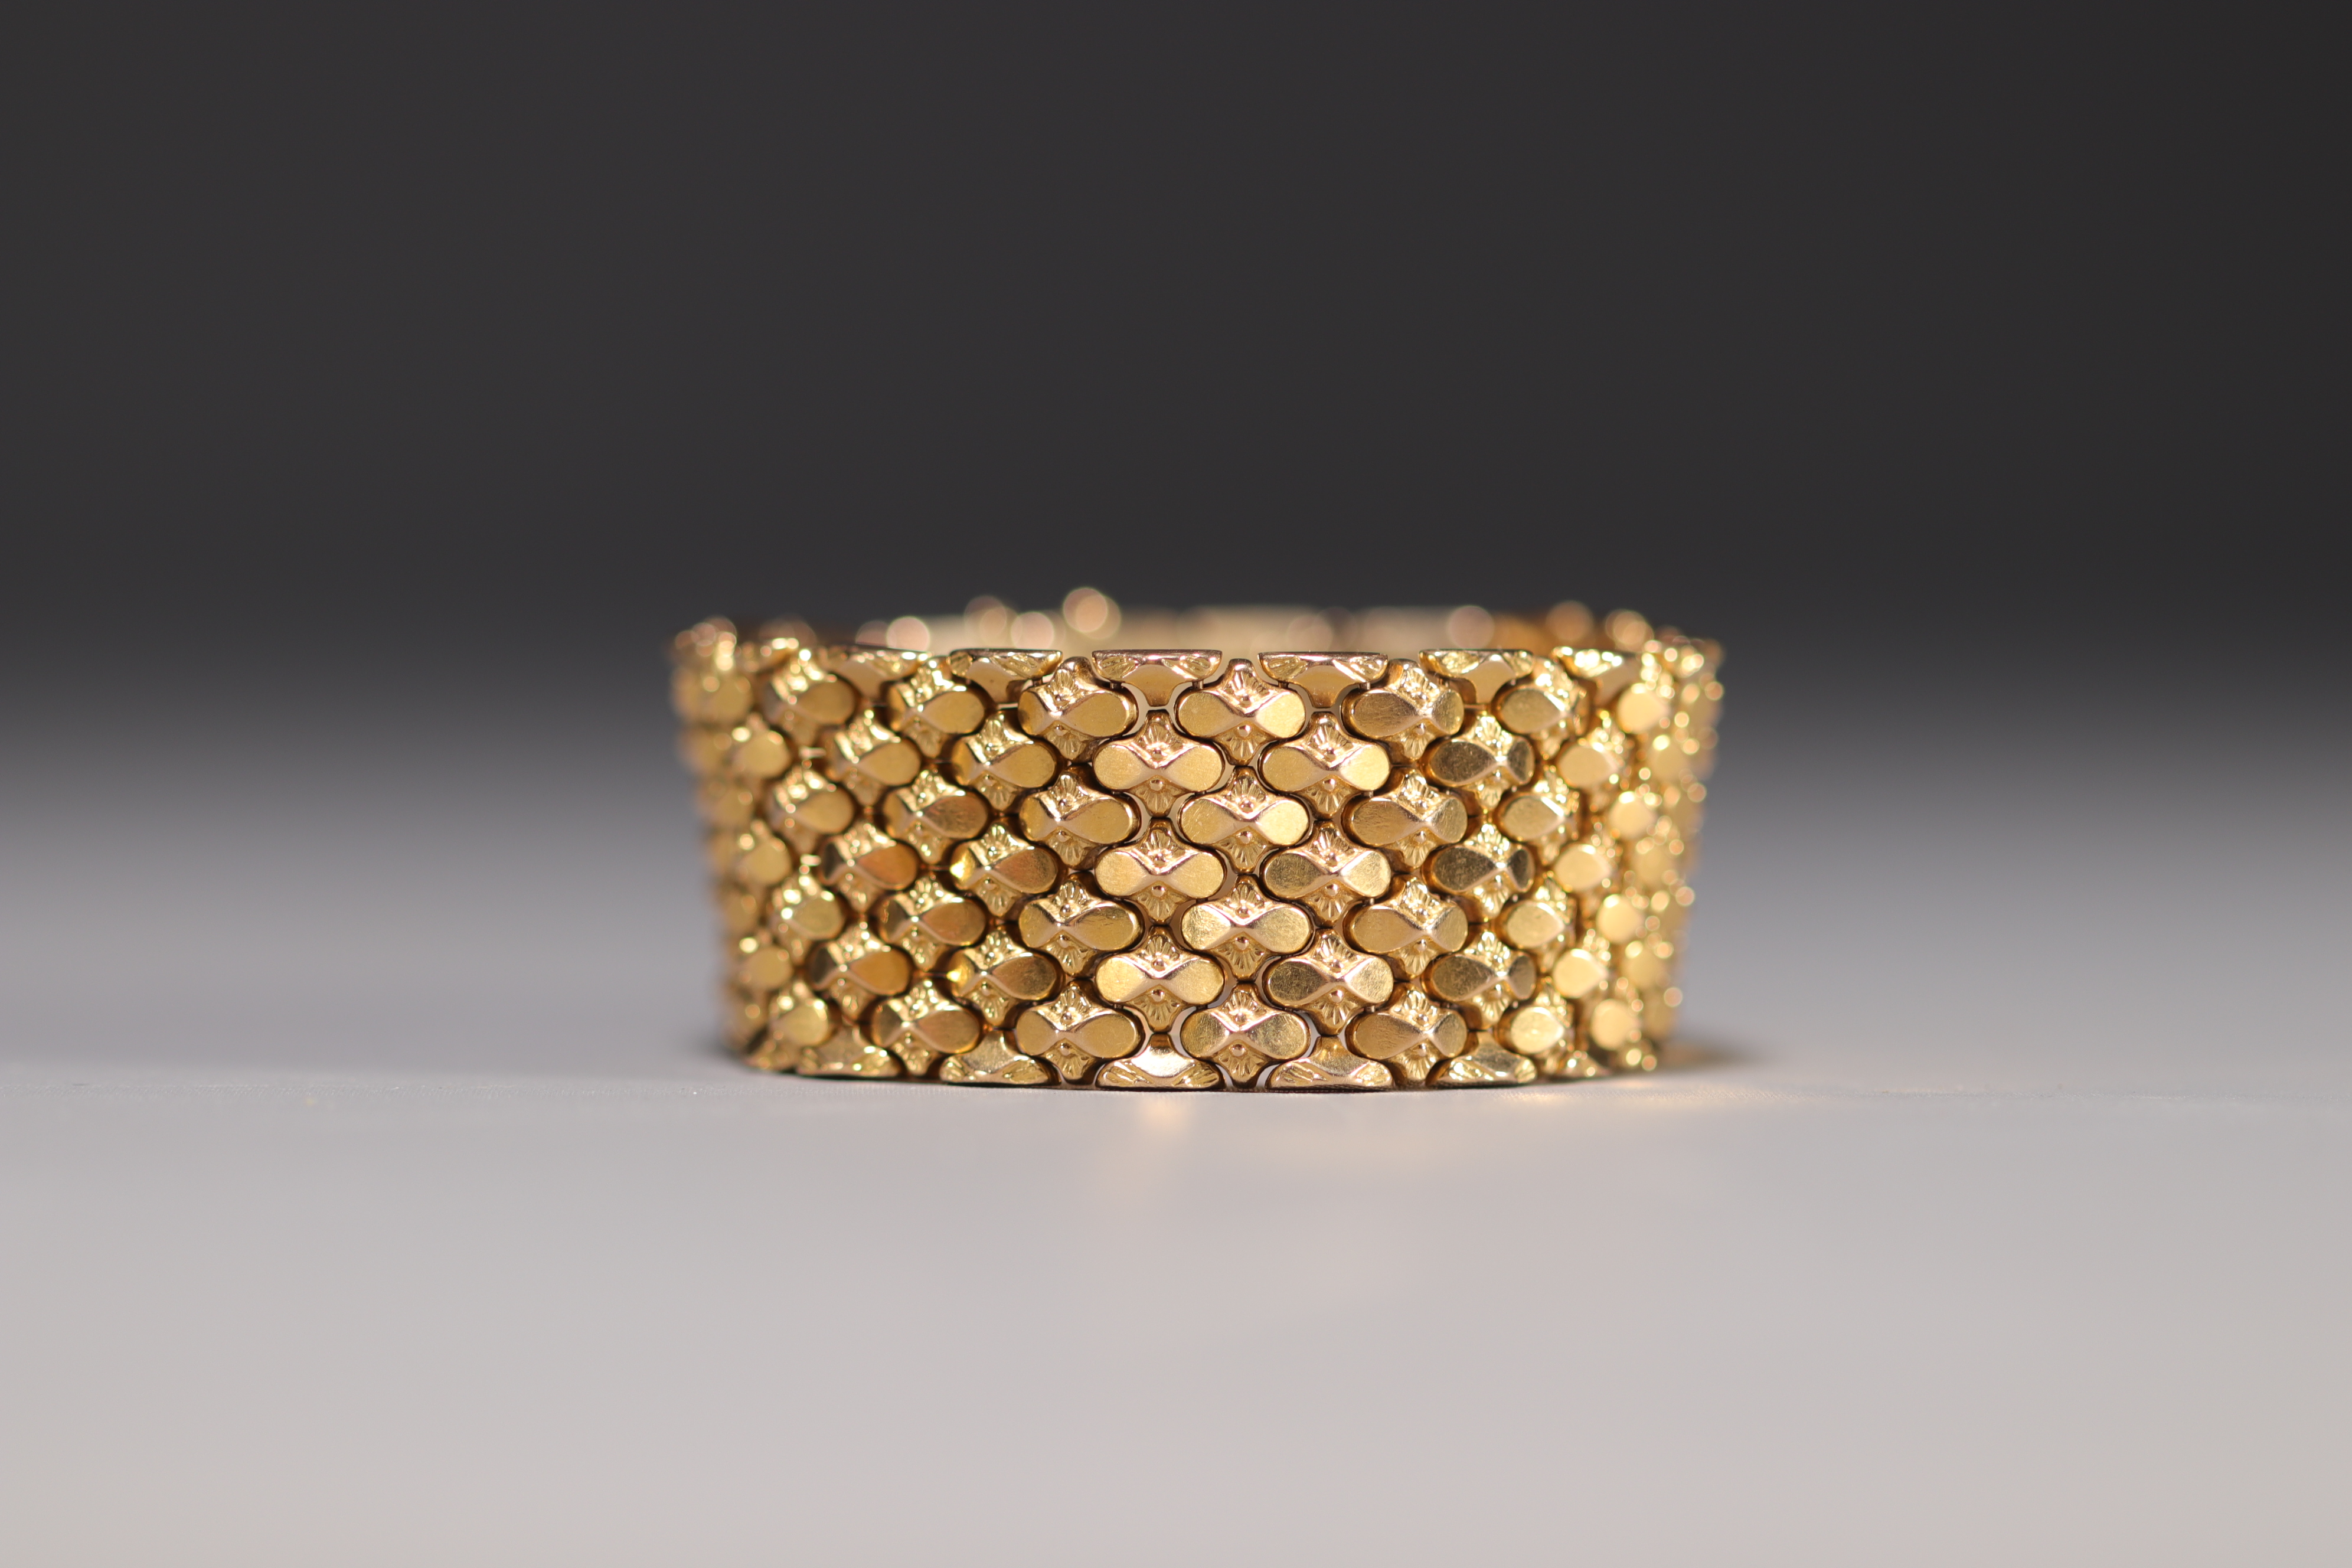 Large flexible bracelet in 18K yellow gold, weighing 62.1gr. - Image 3 of 5